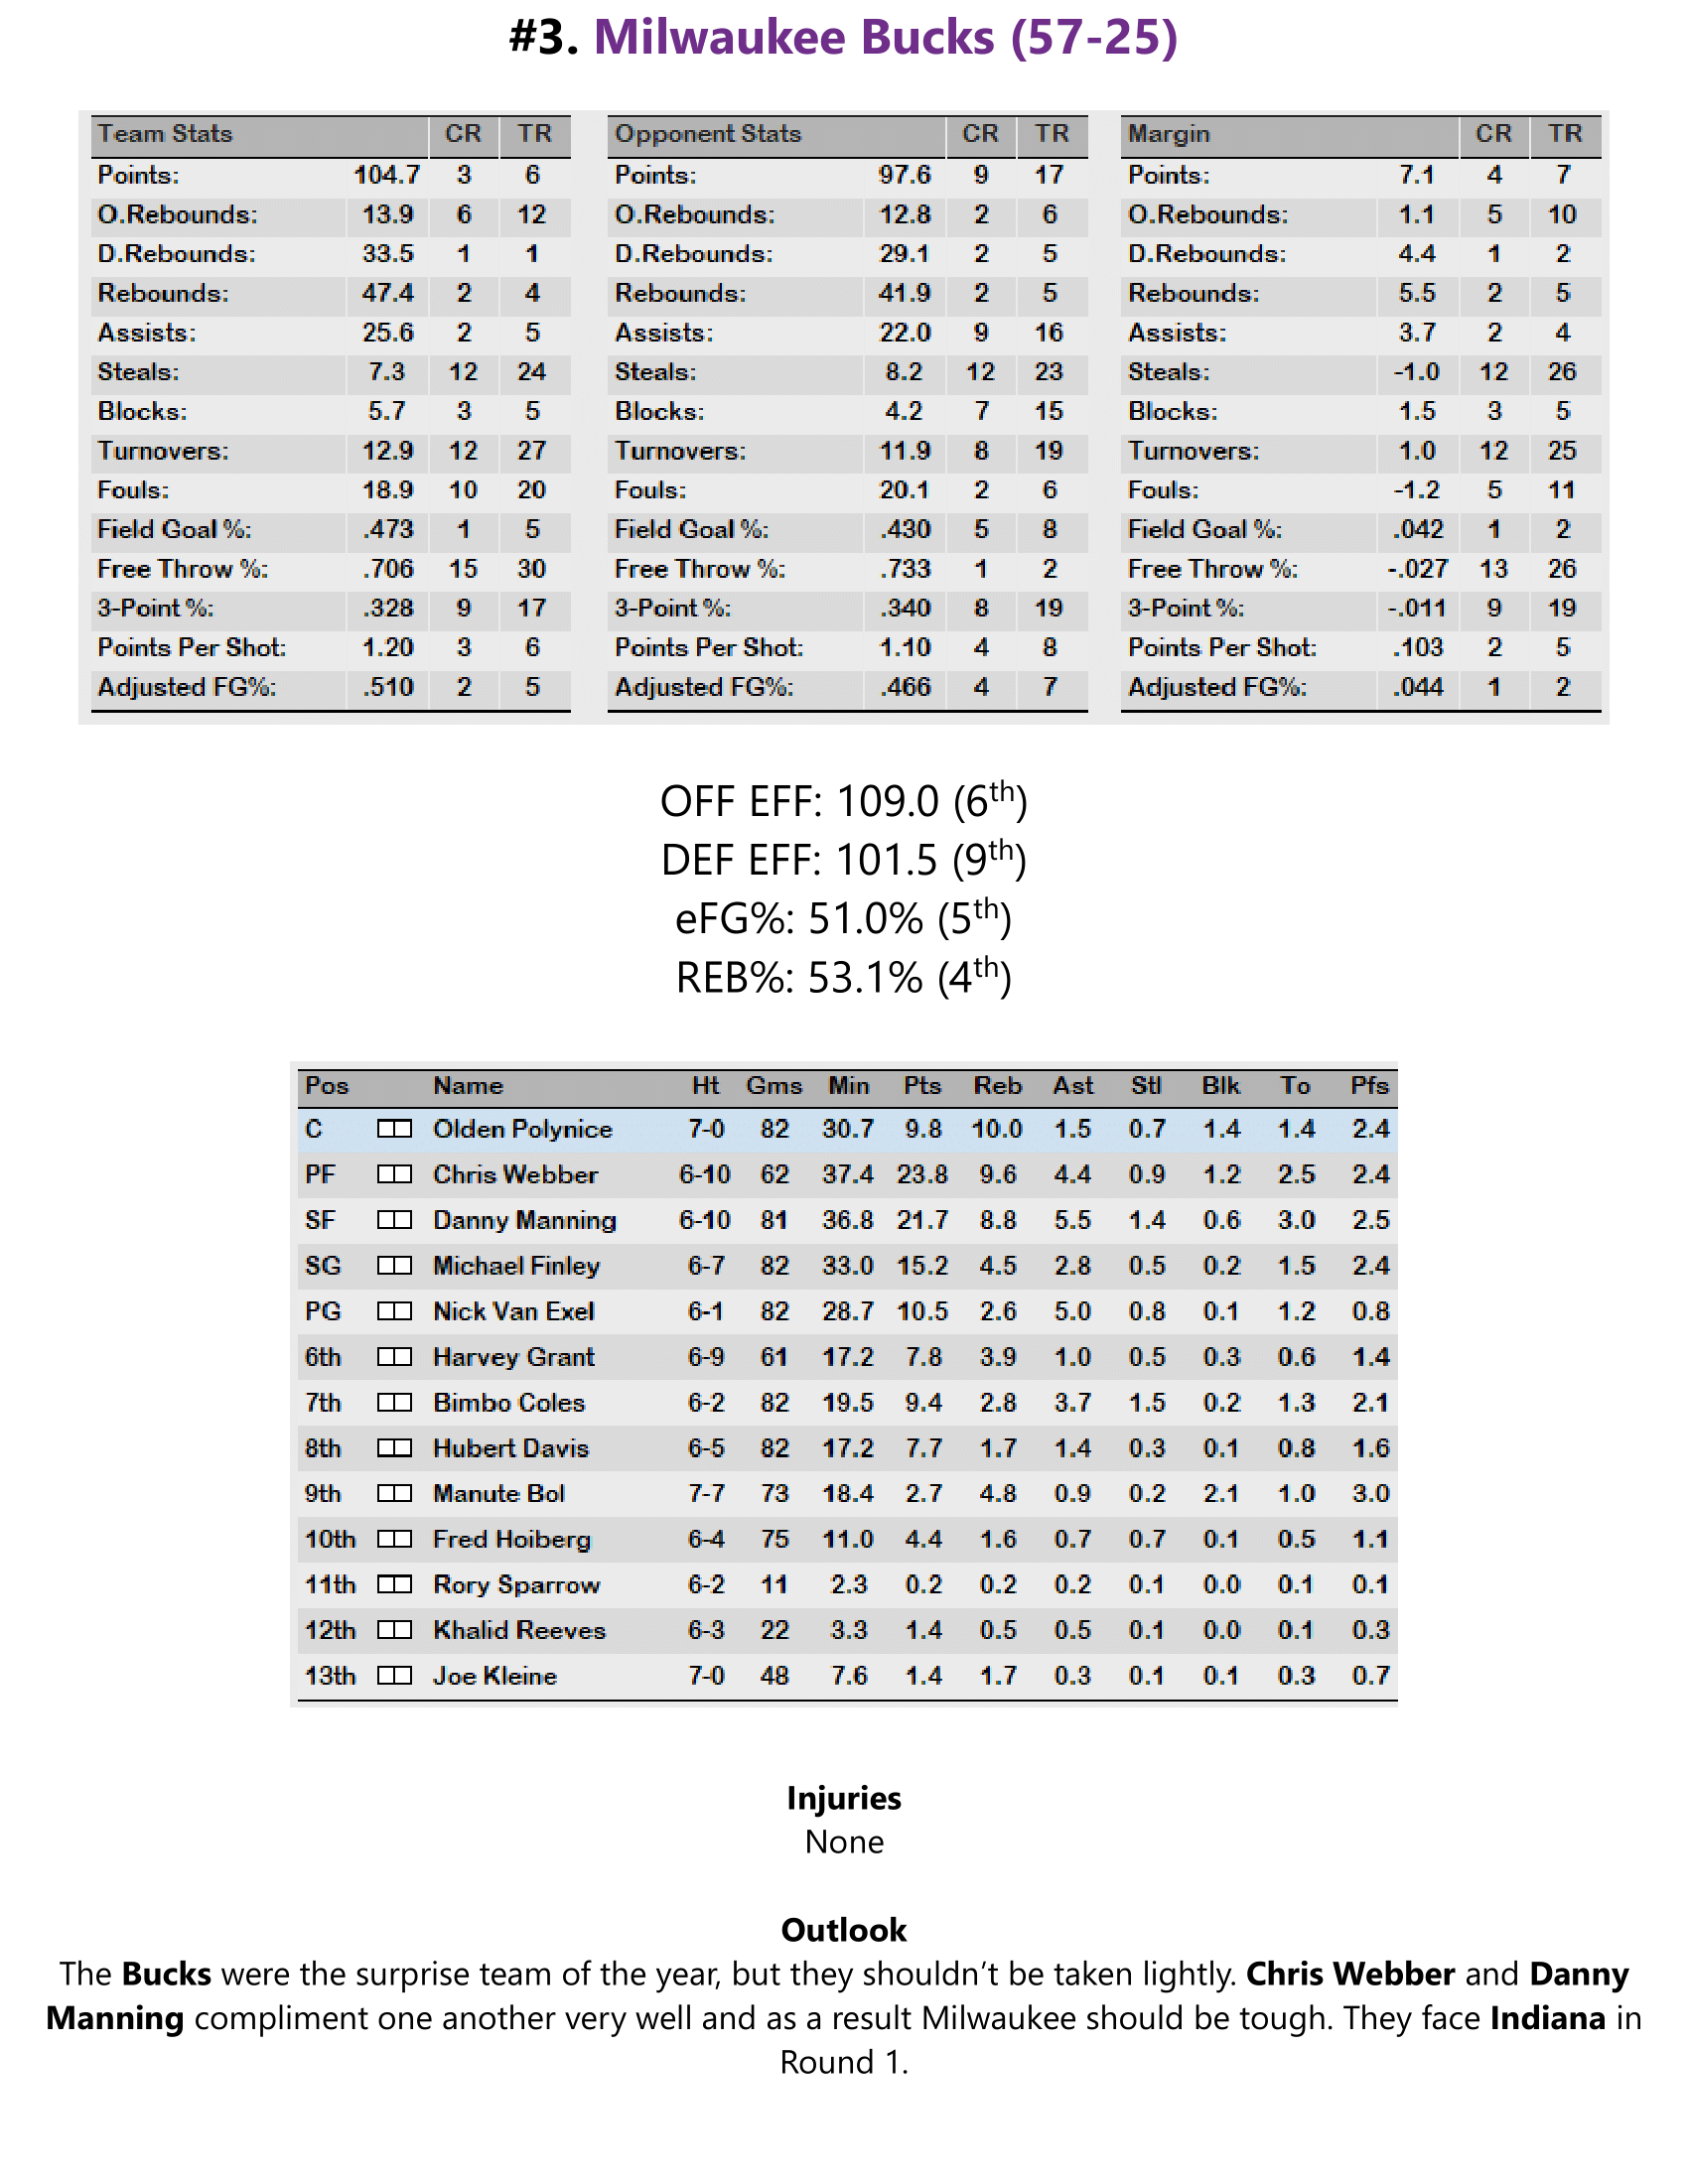 95-96-Part-3-Playoff-Preview-12.png